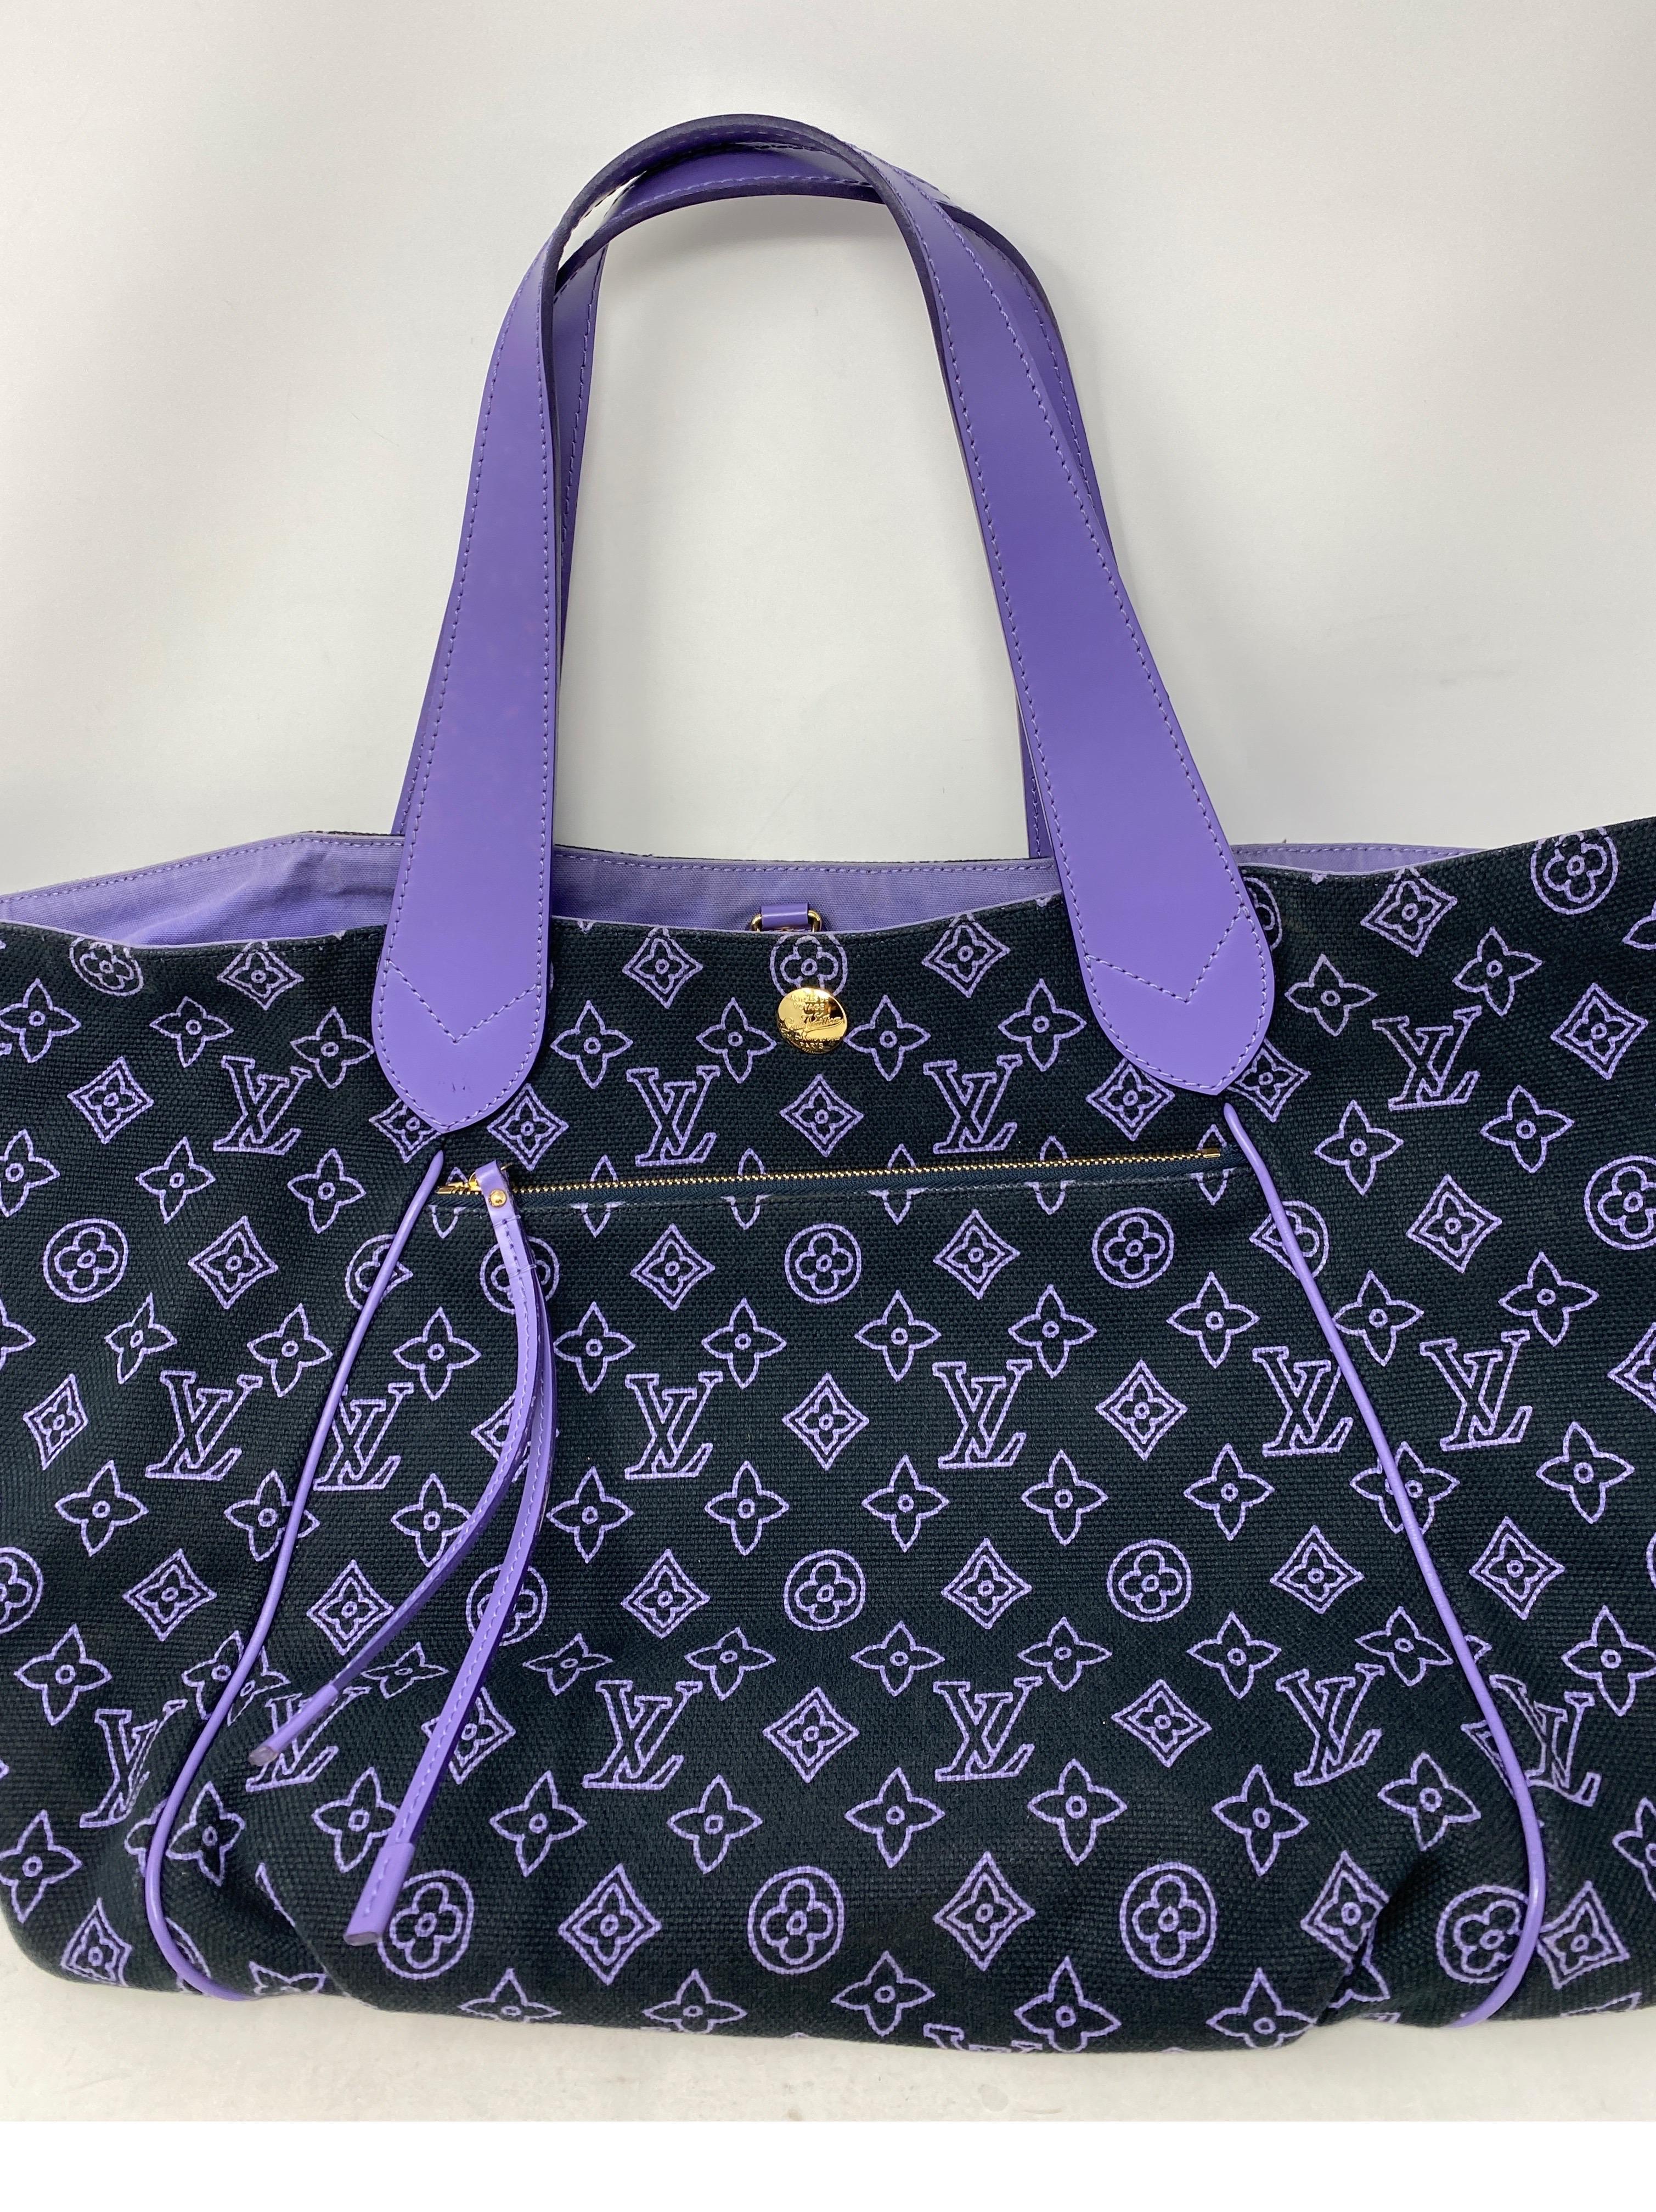 Louis Vuitton Purple Tote Bag. Cotton material with leather trim handles. Includes pouch. Unique LV bag for your collection. Overall good condition. Light tear on one side inside bag and on inside pocket. Please see photos. Gold hardware. Guaranteed